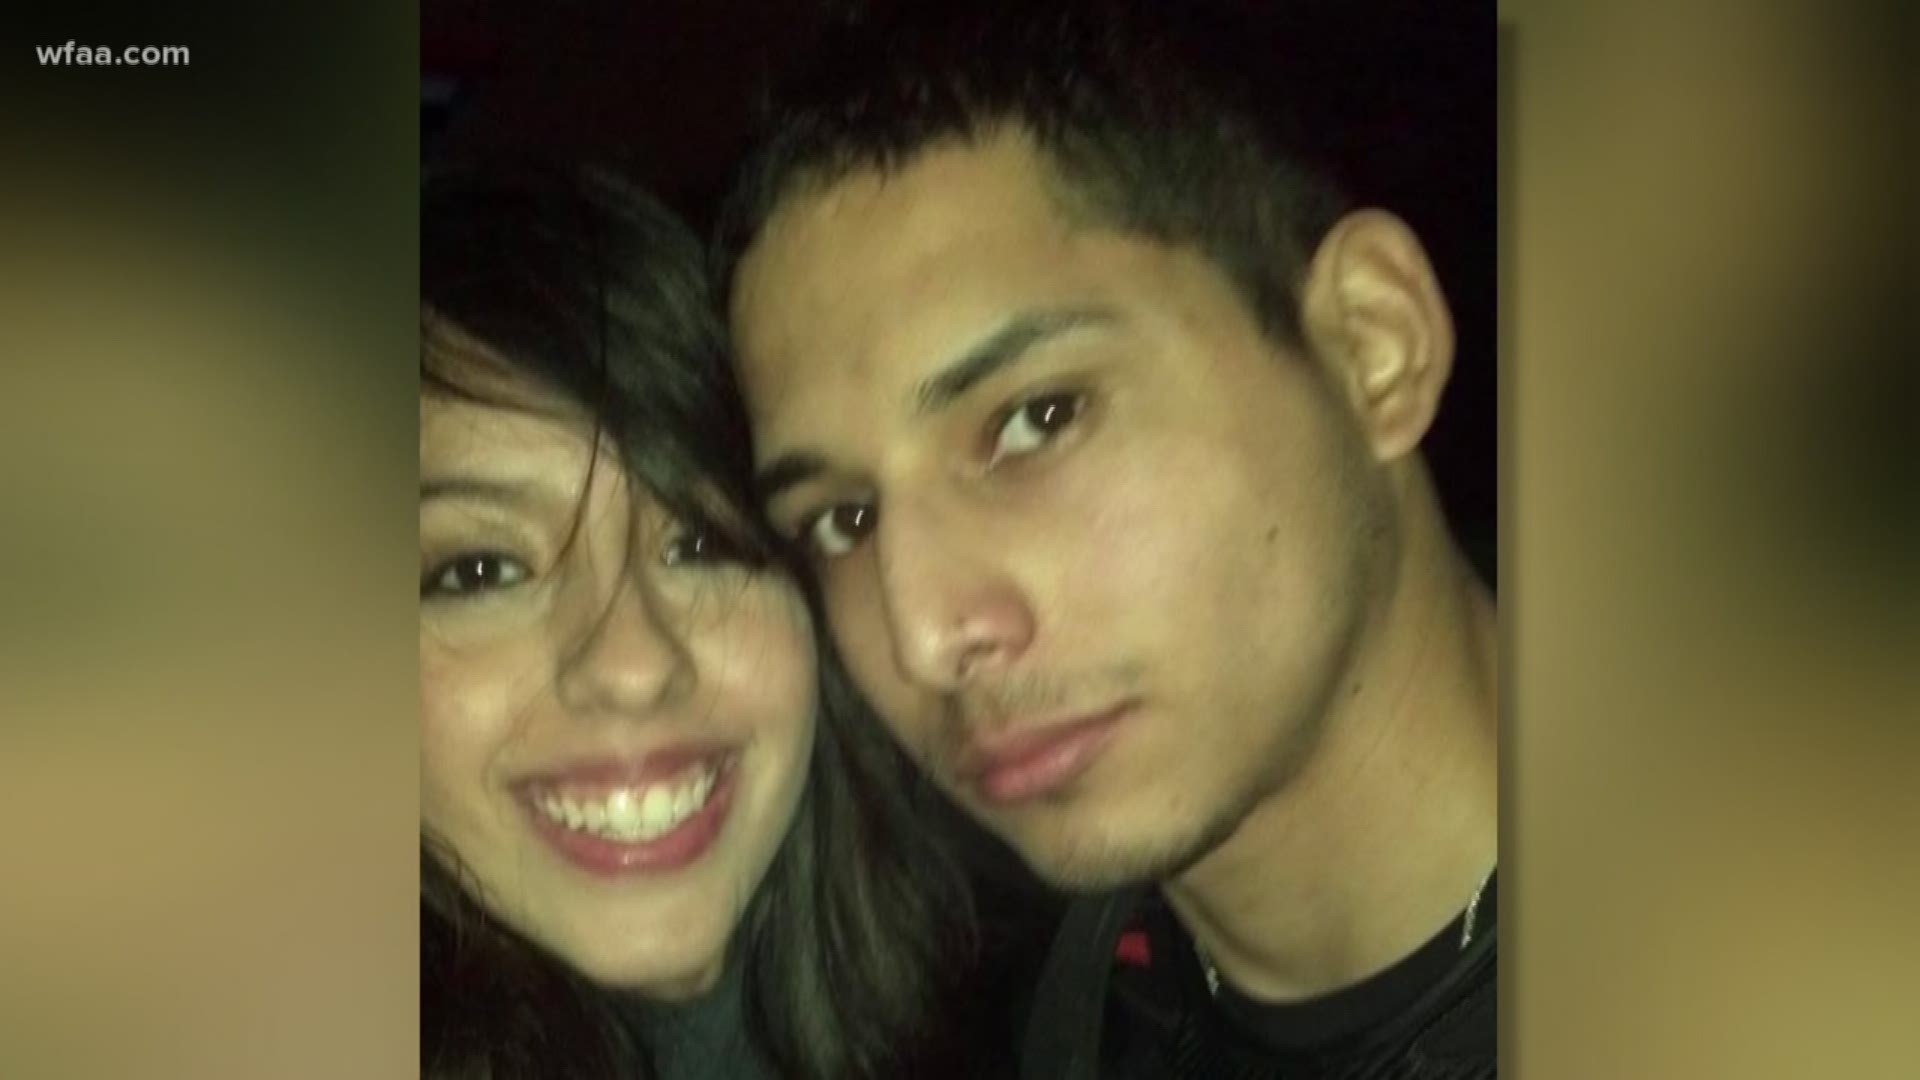 Dallas-Fire Rescue recovered the body of Weltzin Garcia, 26, about 3 p.m. on Wednesday, officials said.